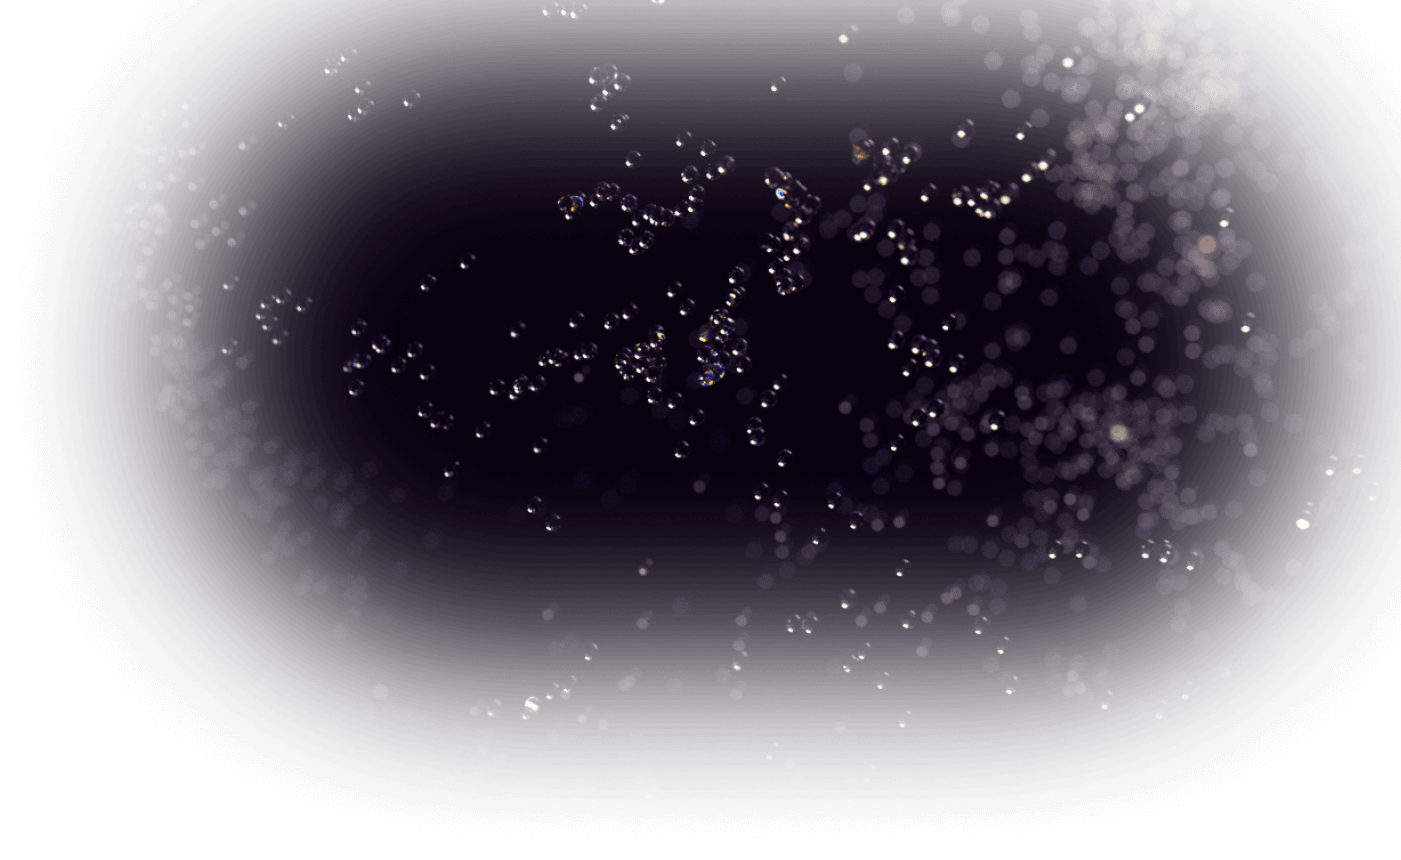 Particle effect